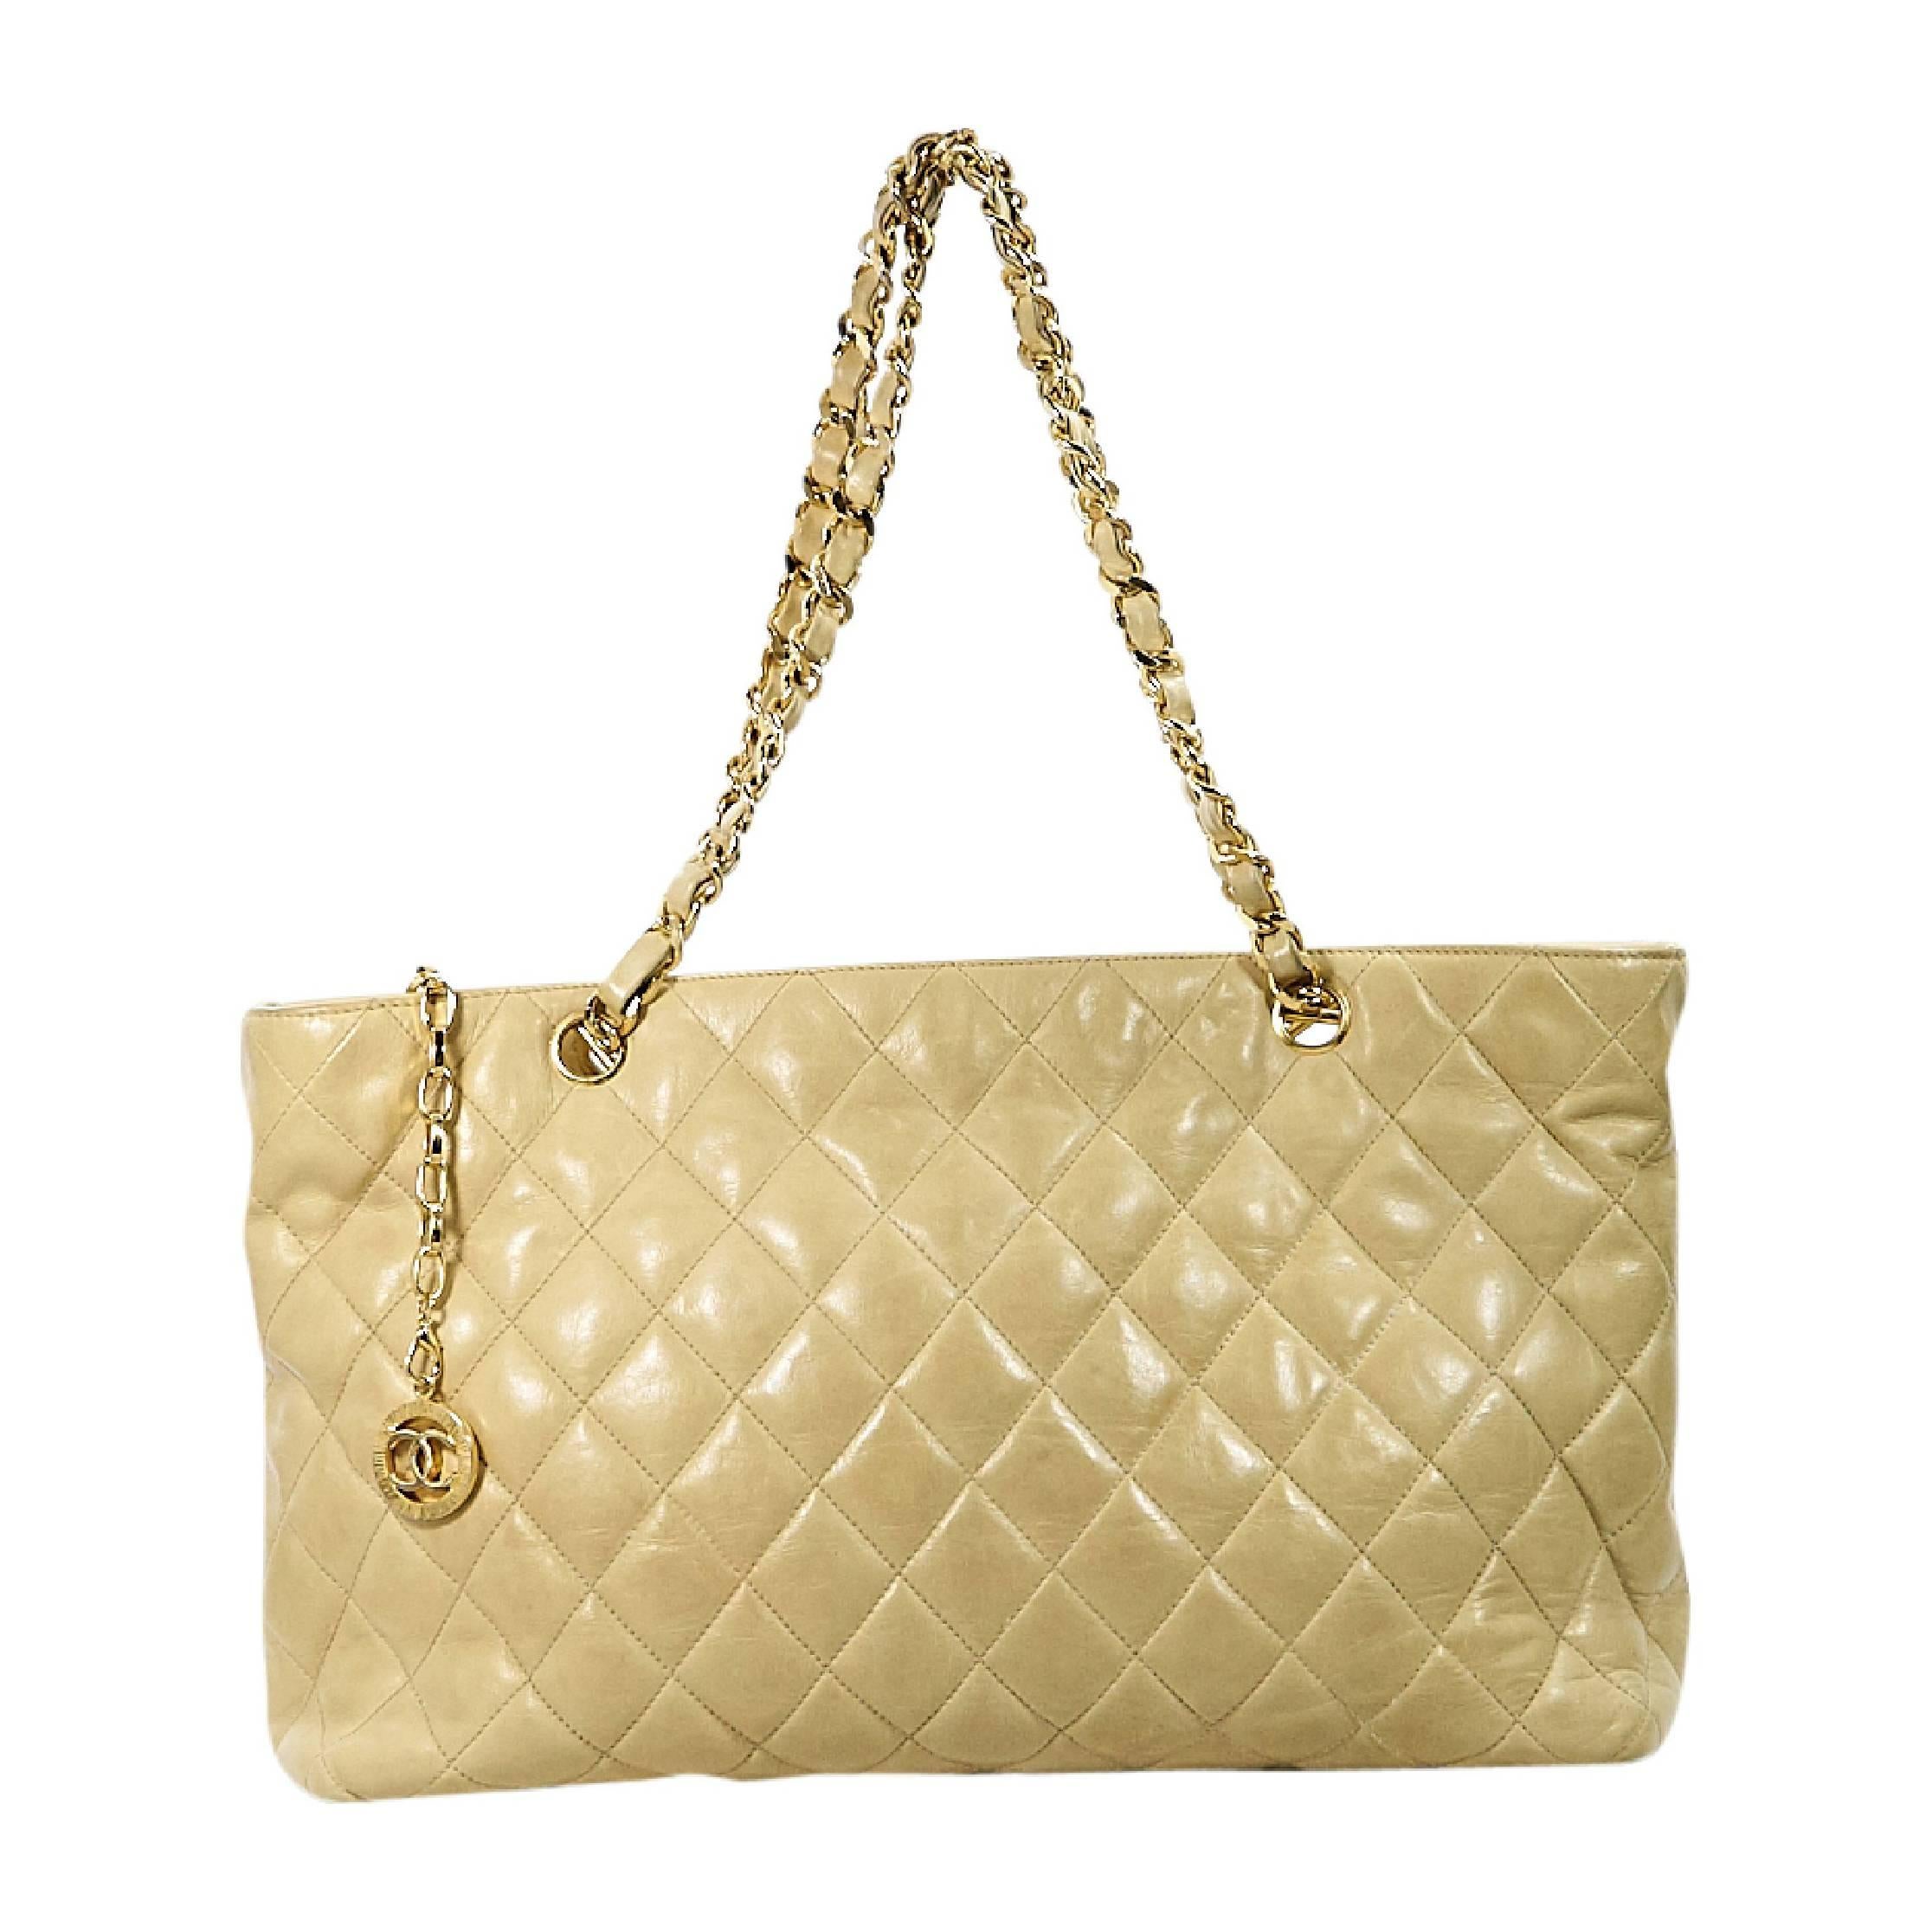 Tan Vintage Chanel Quilted Tote Bag